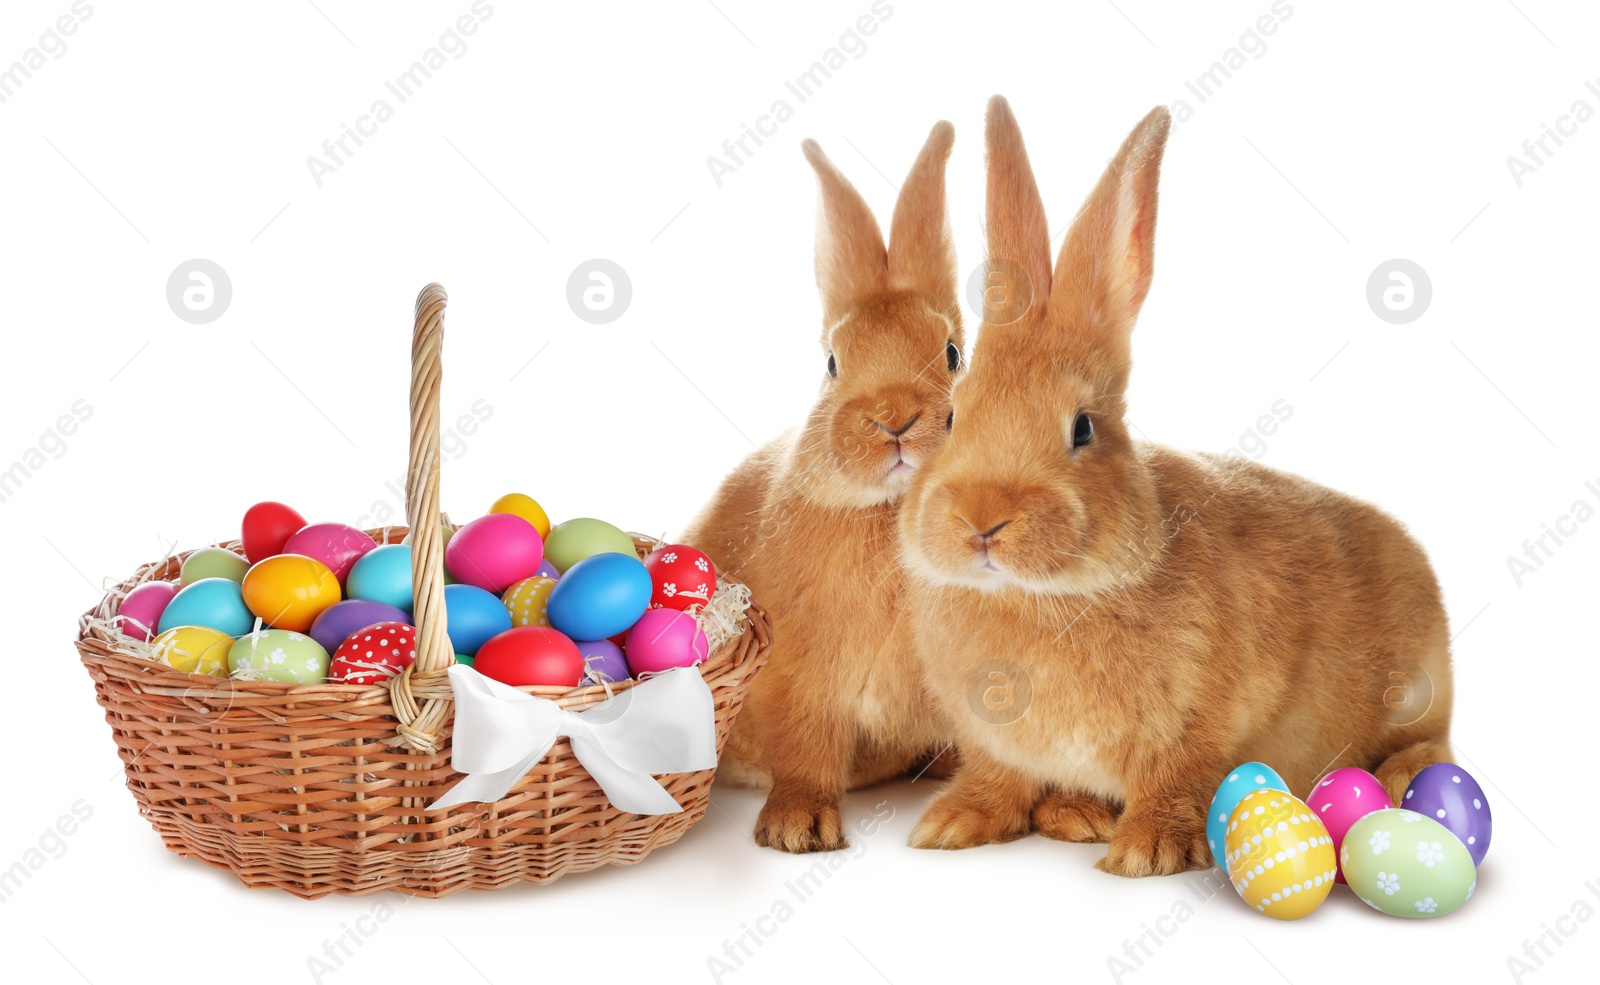 Image of Cute bunnies and wicker basket with bright Easter eggs on white background